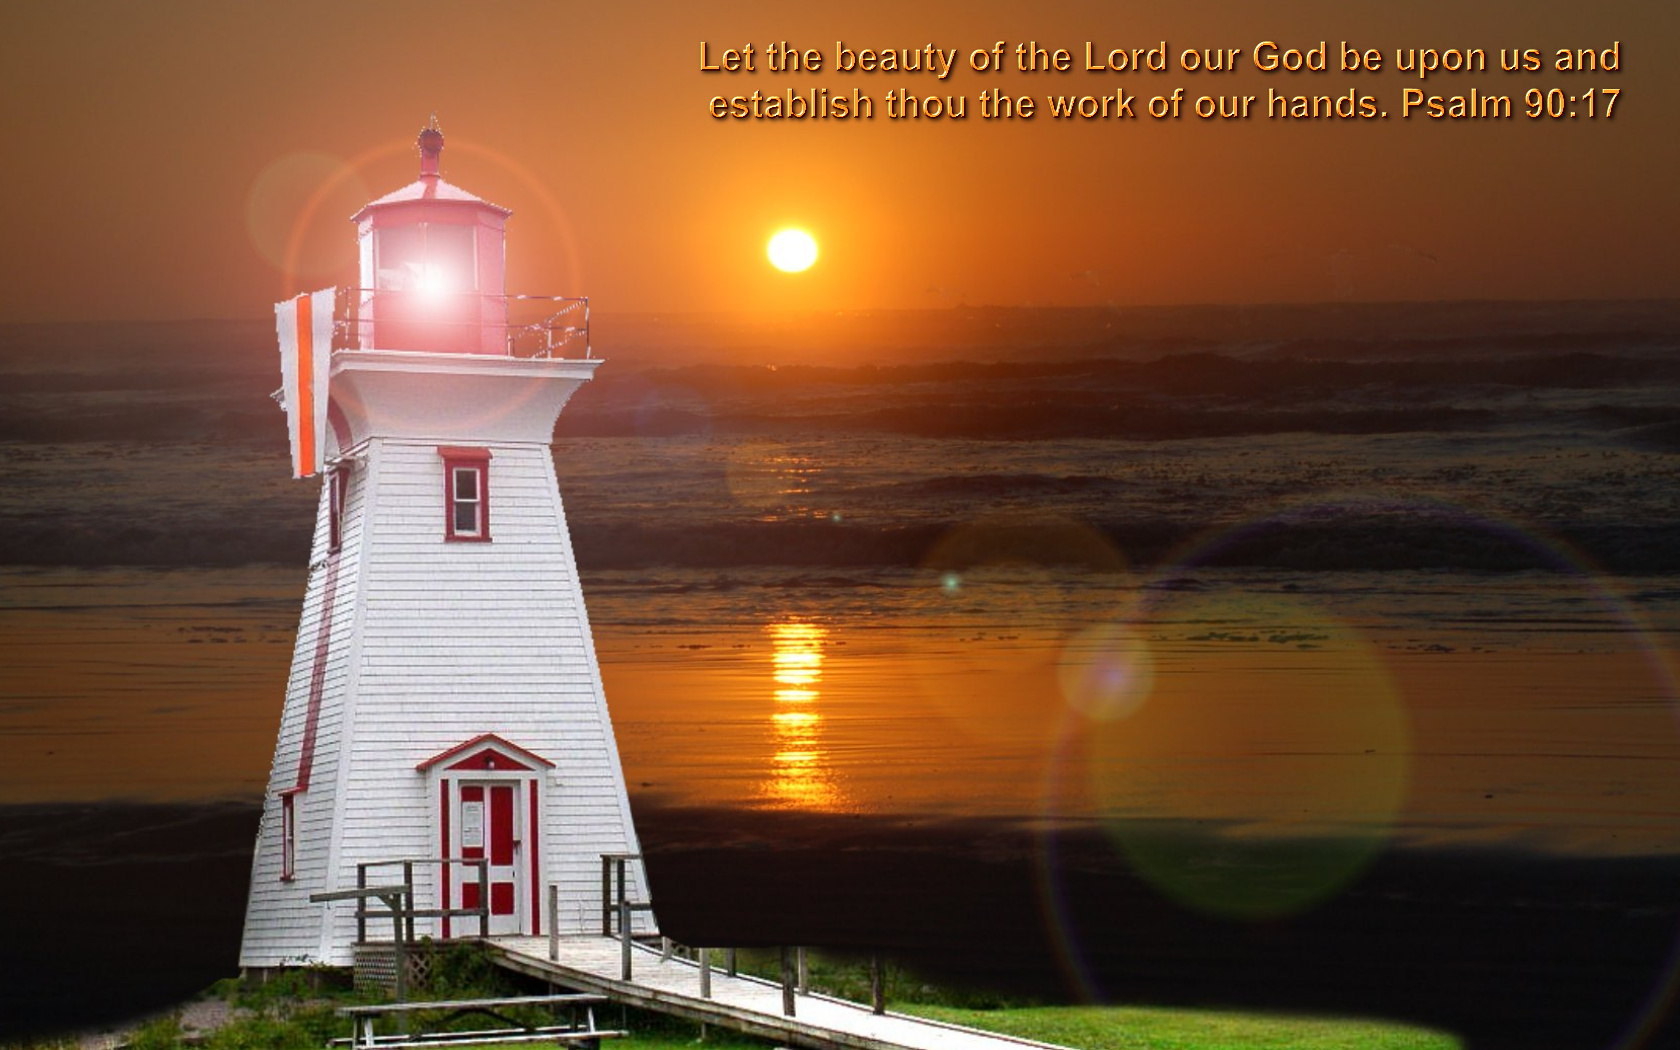 backgrounds tumblr android Christian 90:17 Light In Psalm  Wallpaper Sunset  House